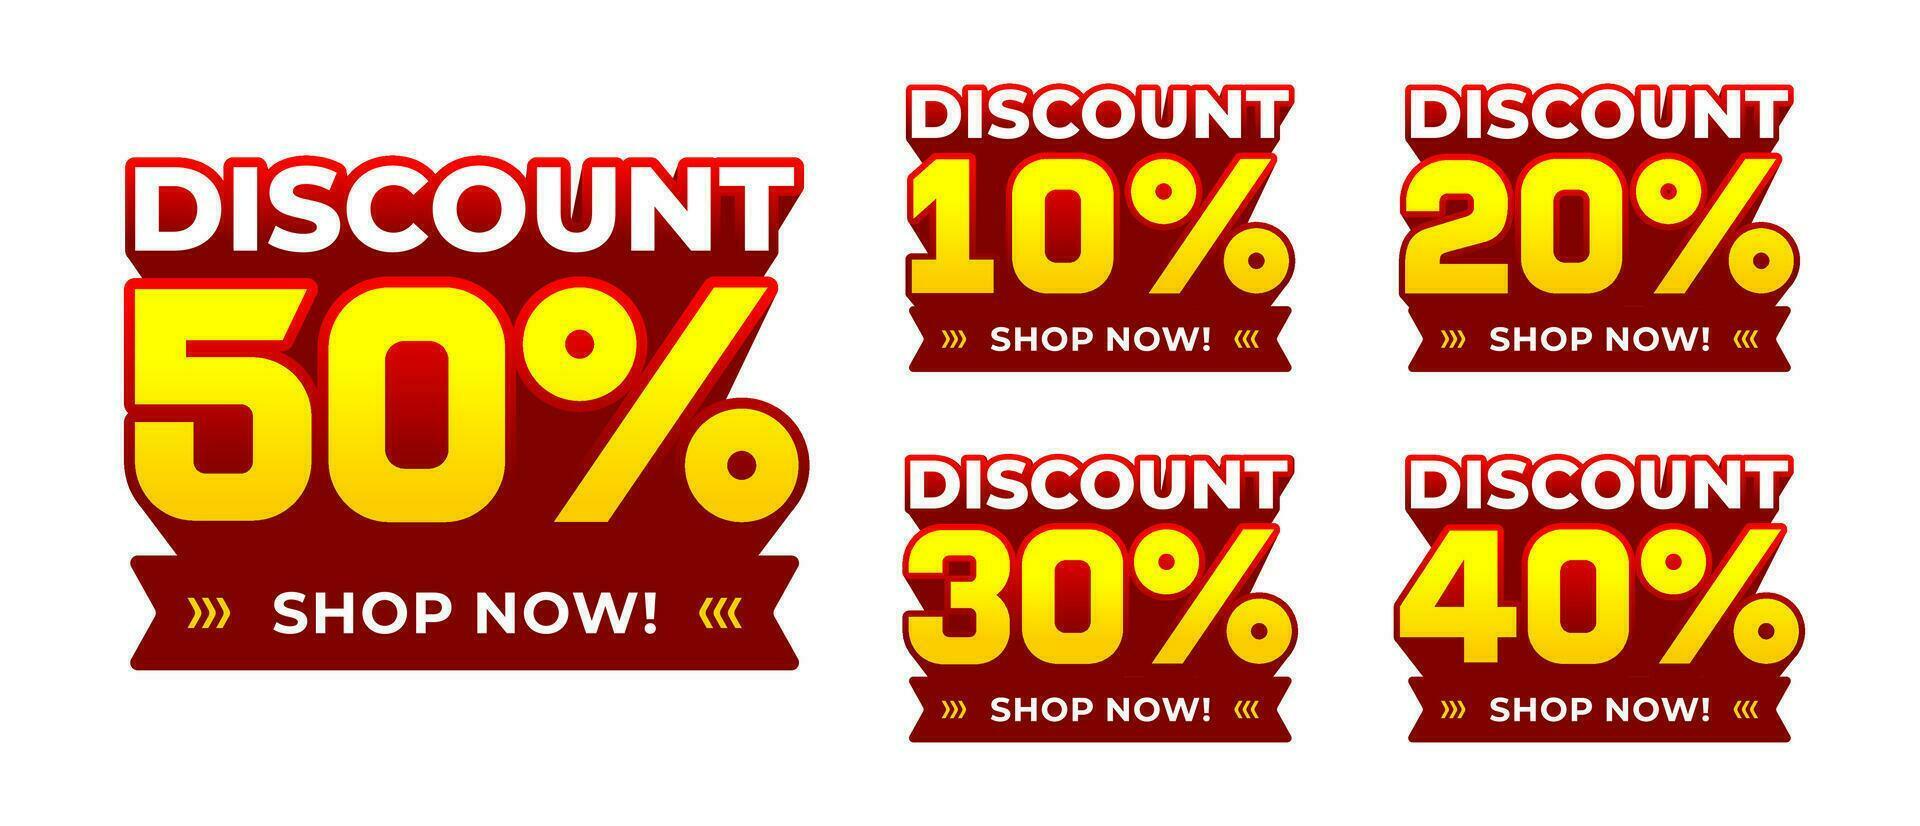 Discount 10, 20, 30, 40, 50 percent label with 3d extrude style effect font. for emblem, badge, banner, icon. Promotion design set vector illustration isolated on white background